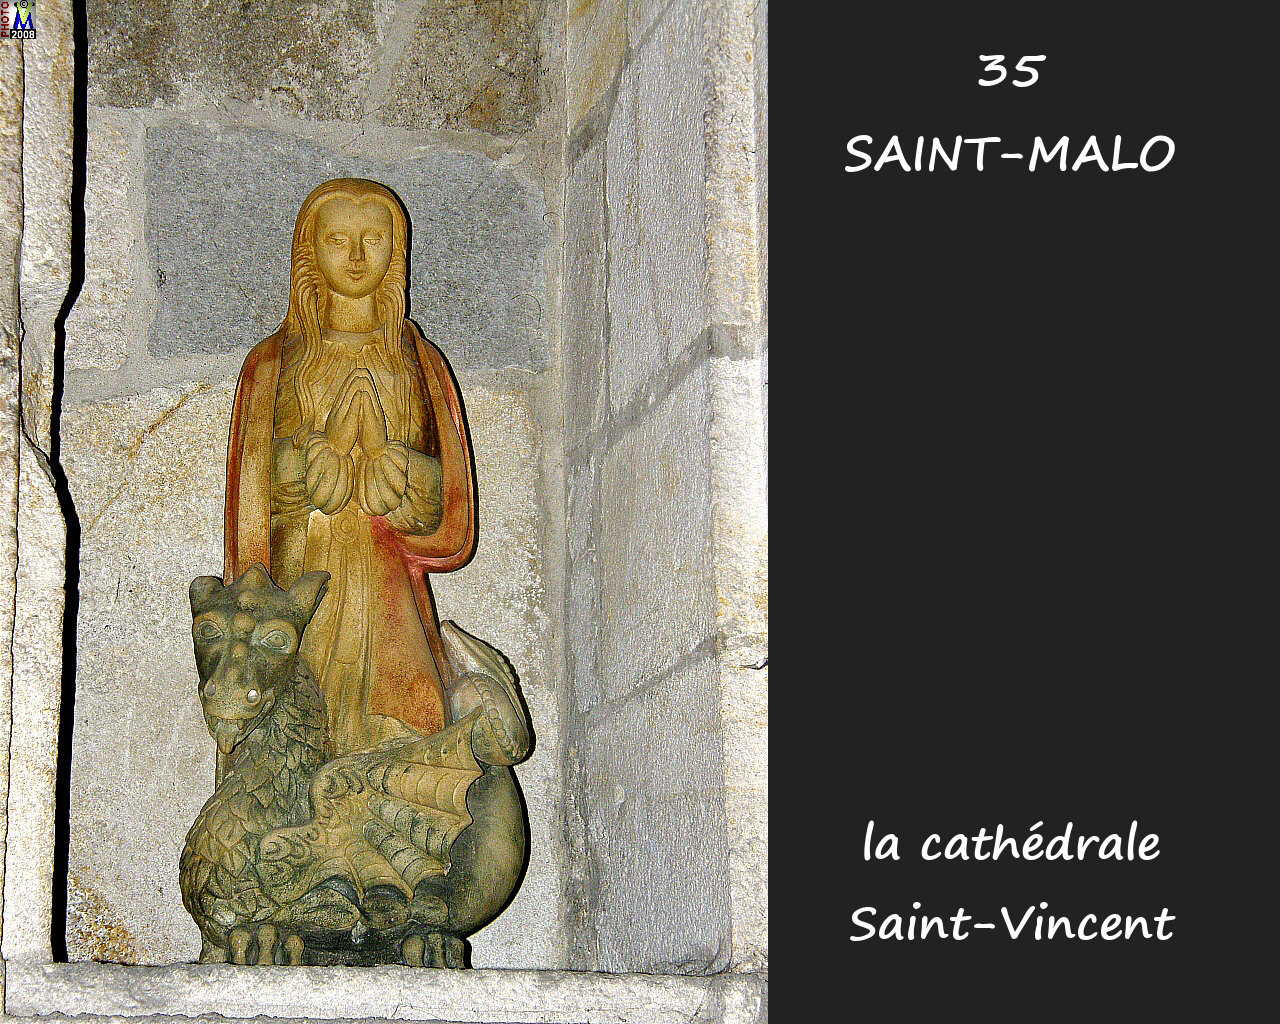 35StMALO_cathedrale_260.jpg